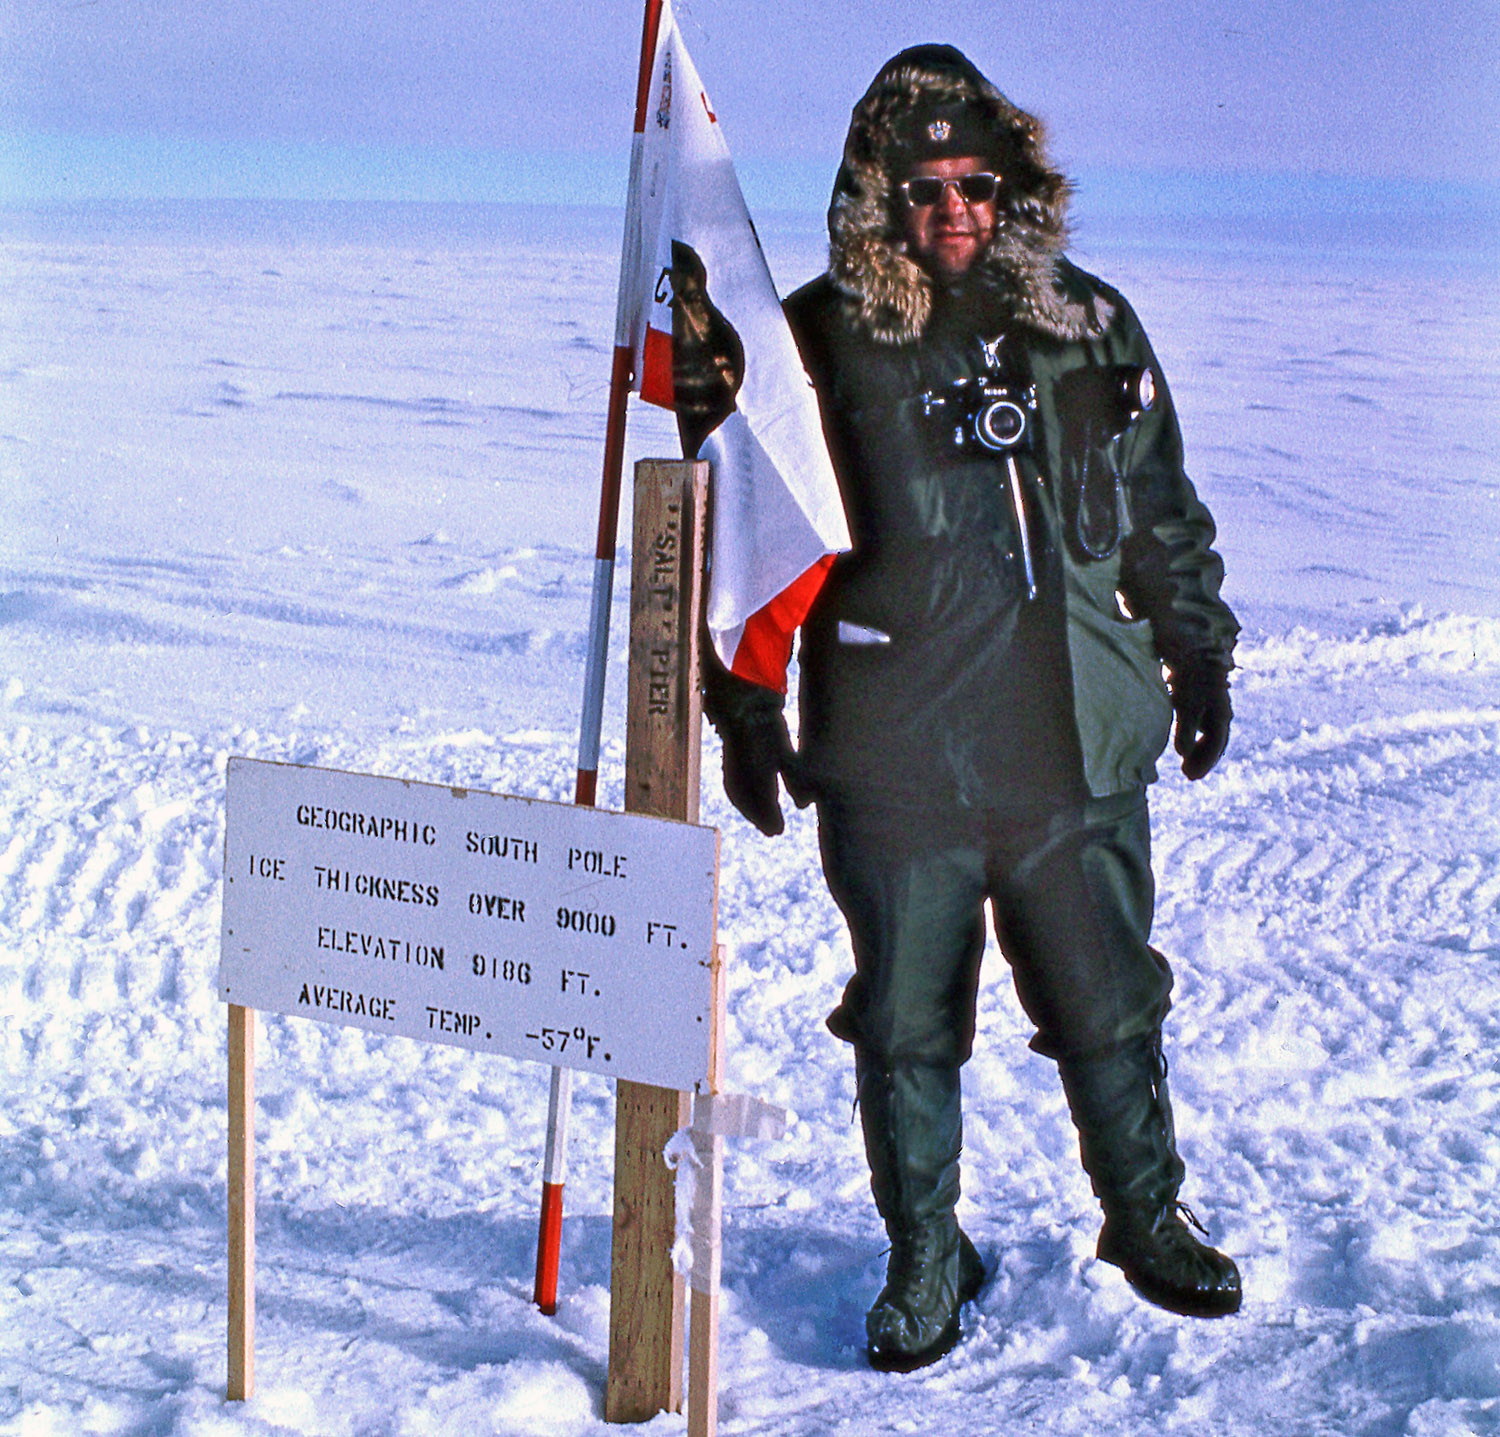 People - Ralph Lewis at South Pole, Antarctica